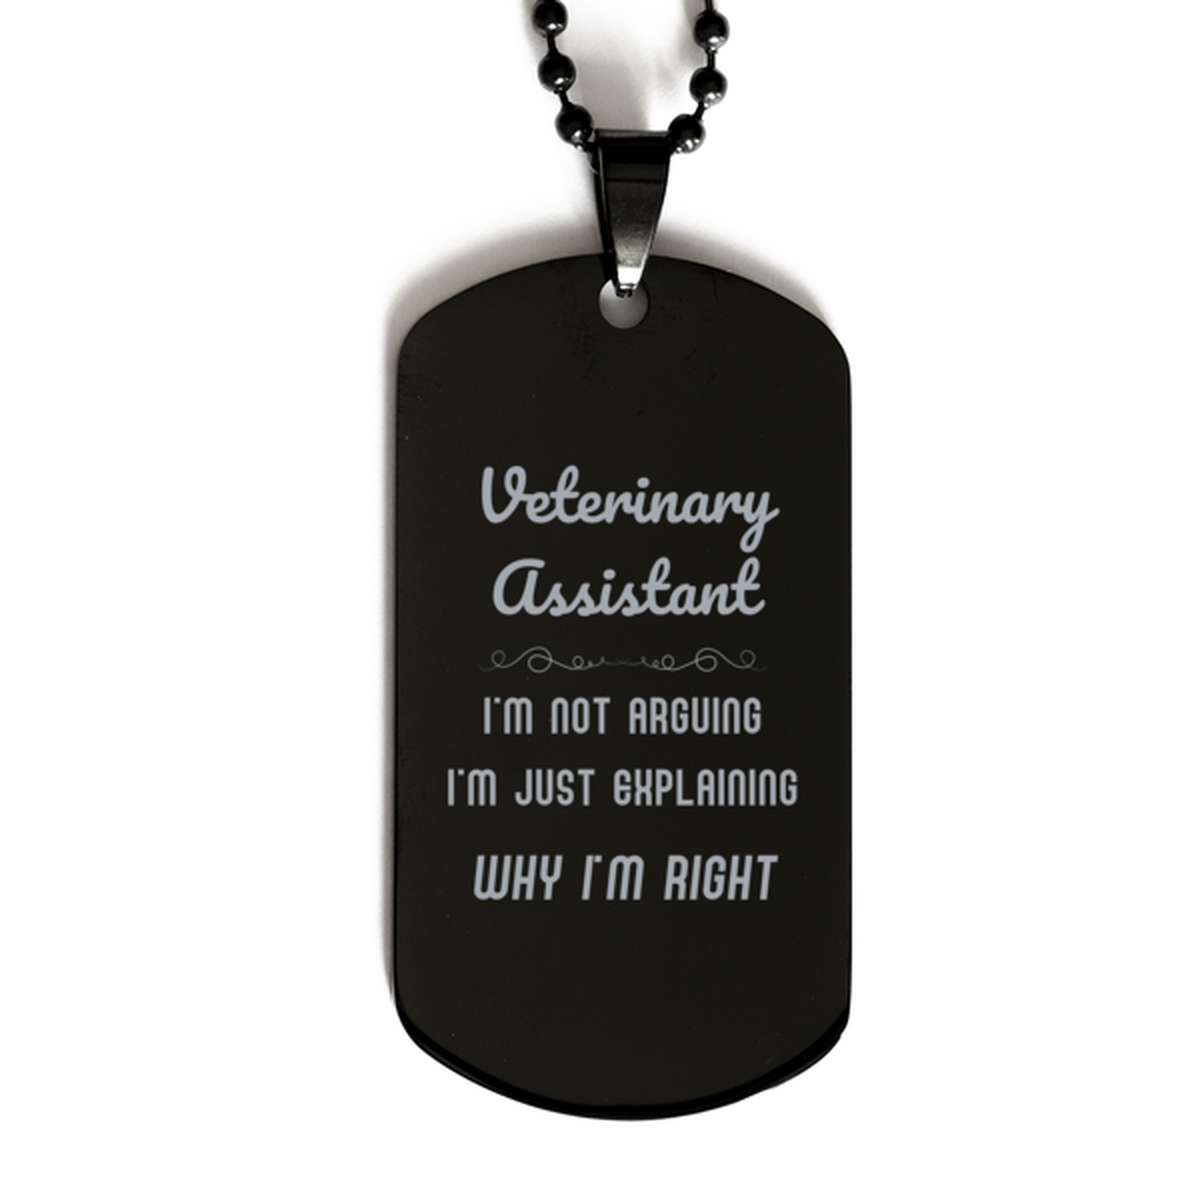 Veterinary Assistant I'm not Arguing. I'm Just Explaining Why I'm RIGHT Black Dog Tag, Funny Saying Quote Veterinary Assistant Gifts For Veterinary Assistant Graduation Birthday Christmas Gifts for Men Women Coworker